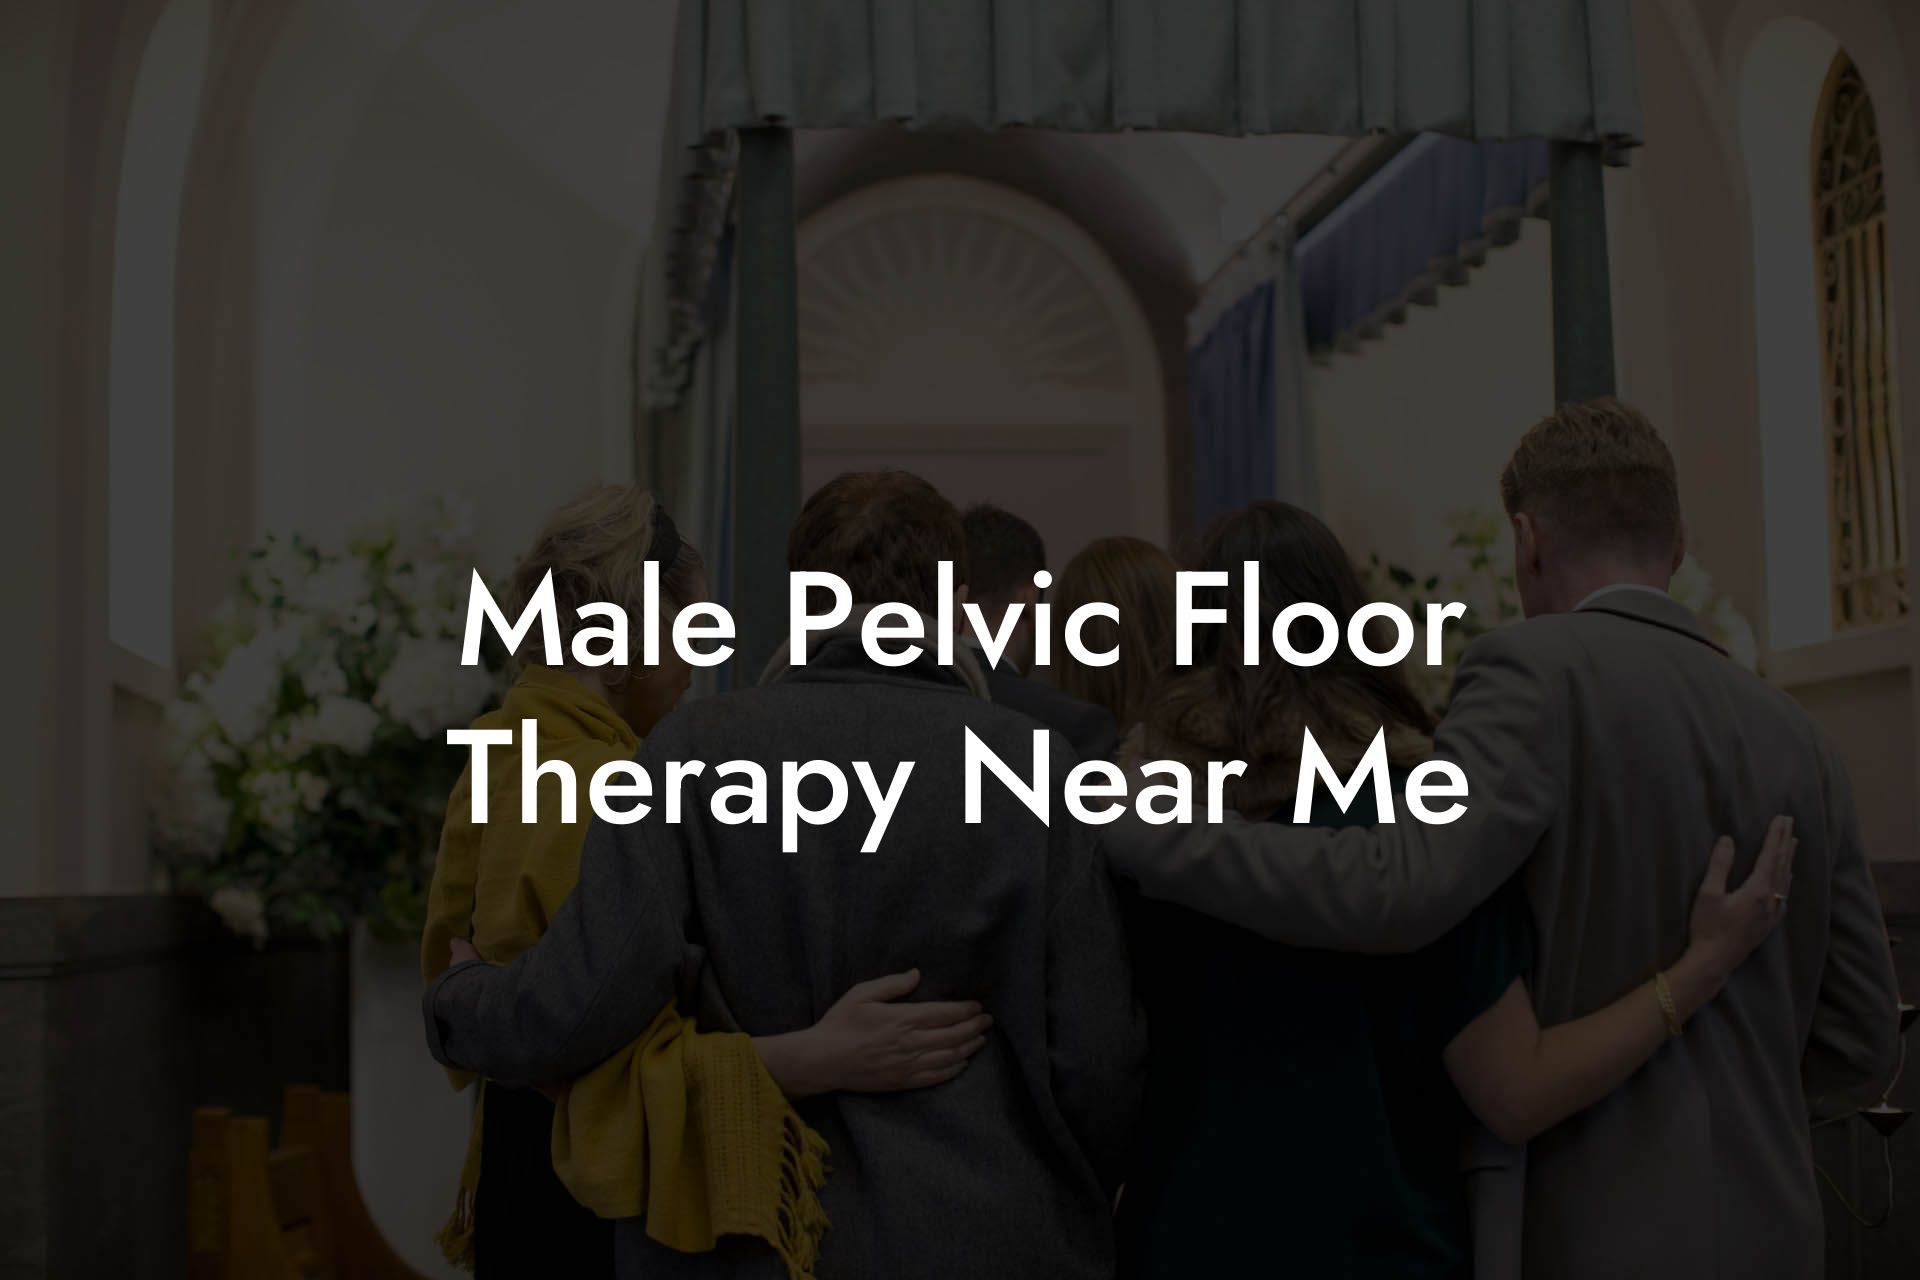 Male Pelvic Floor Therapy Near Me